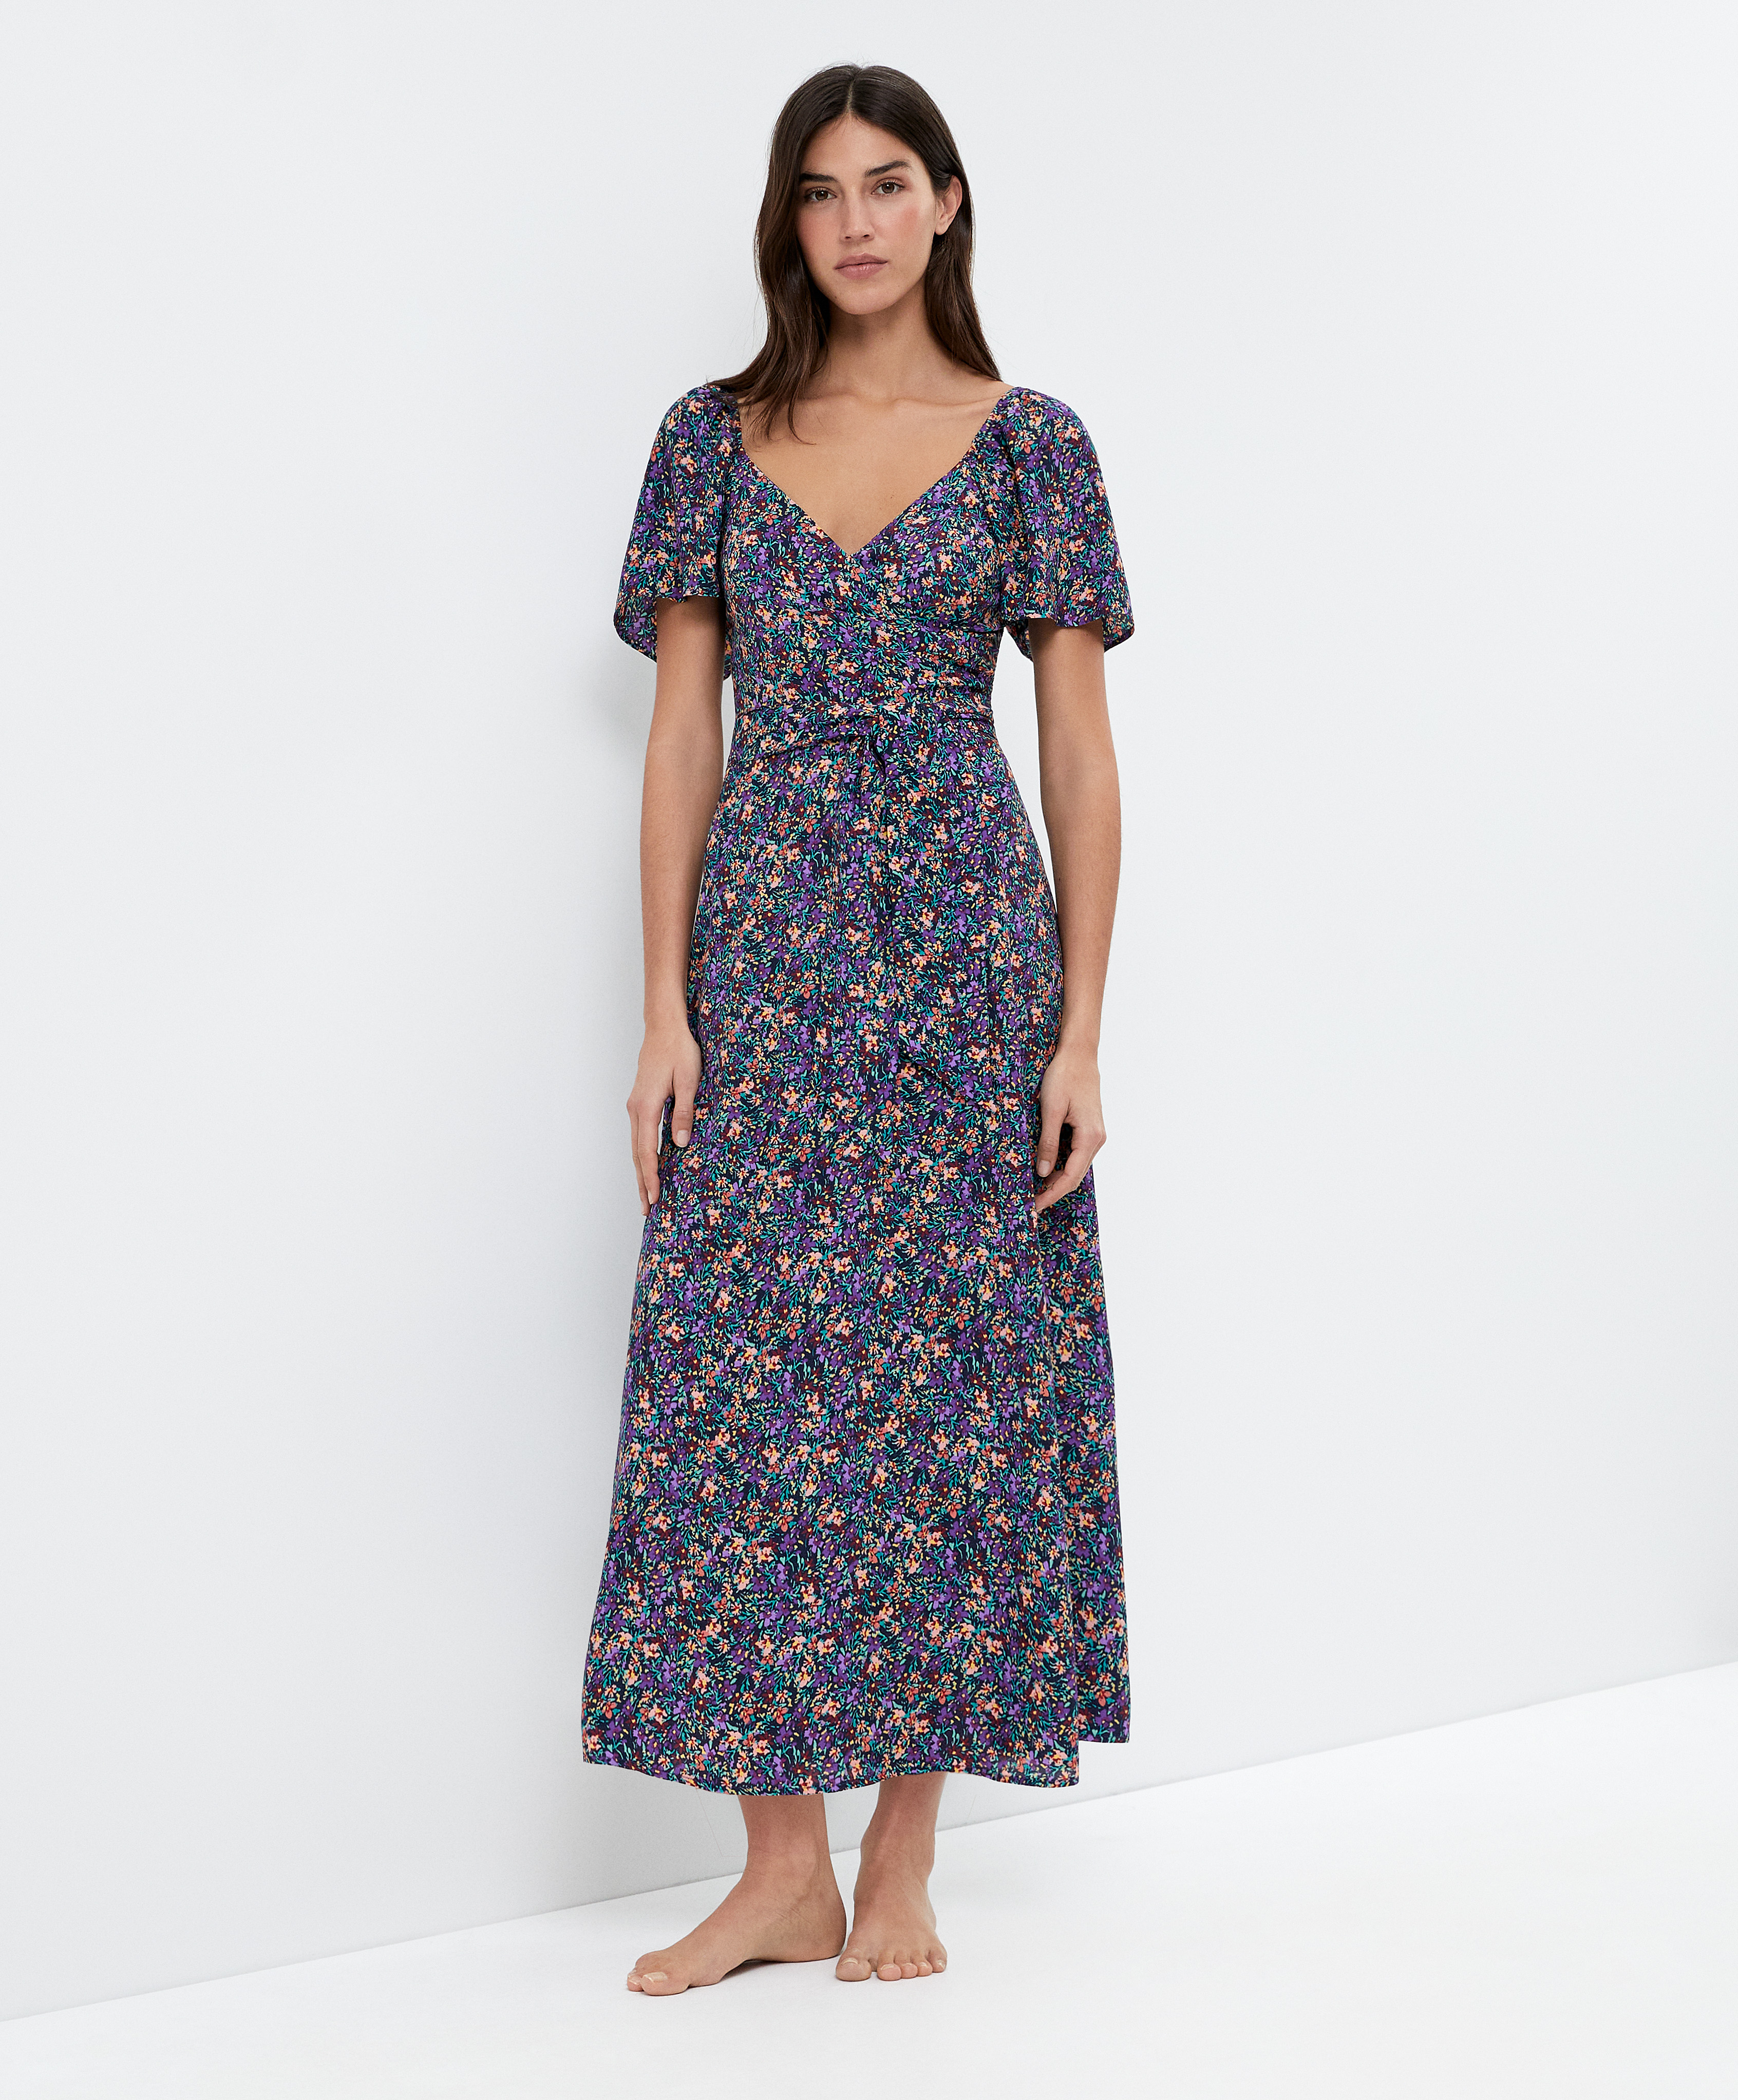 and beach dresses | United States